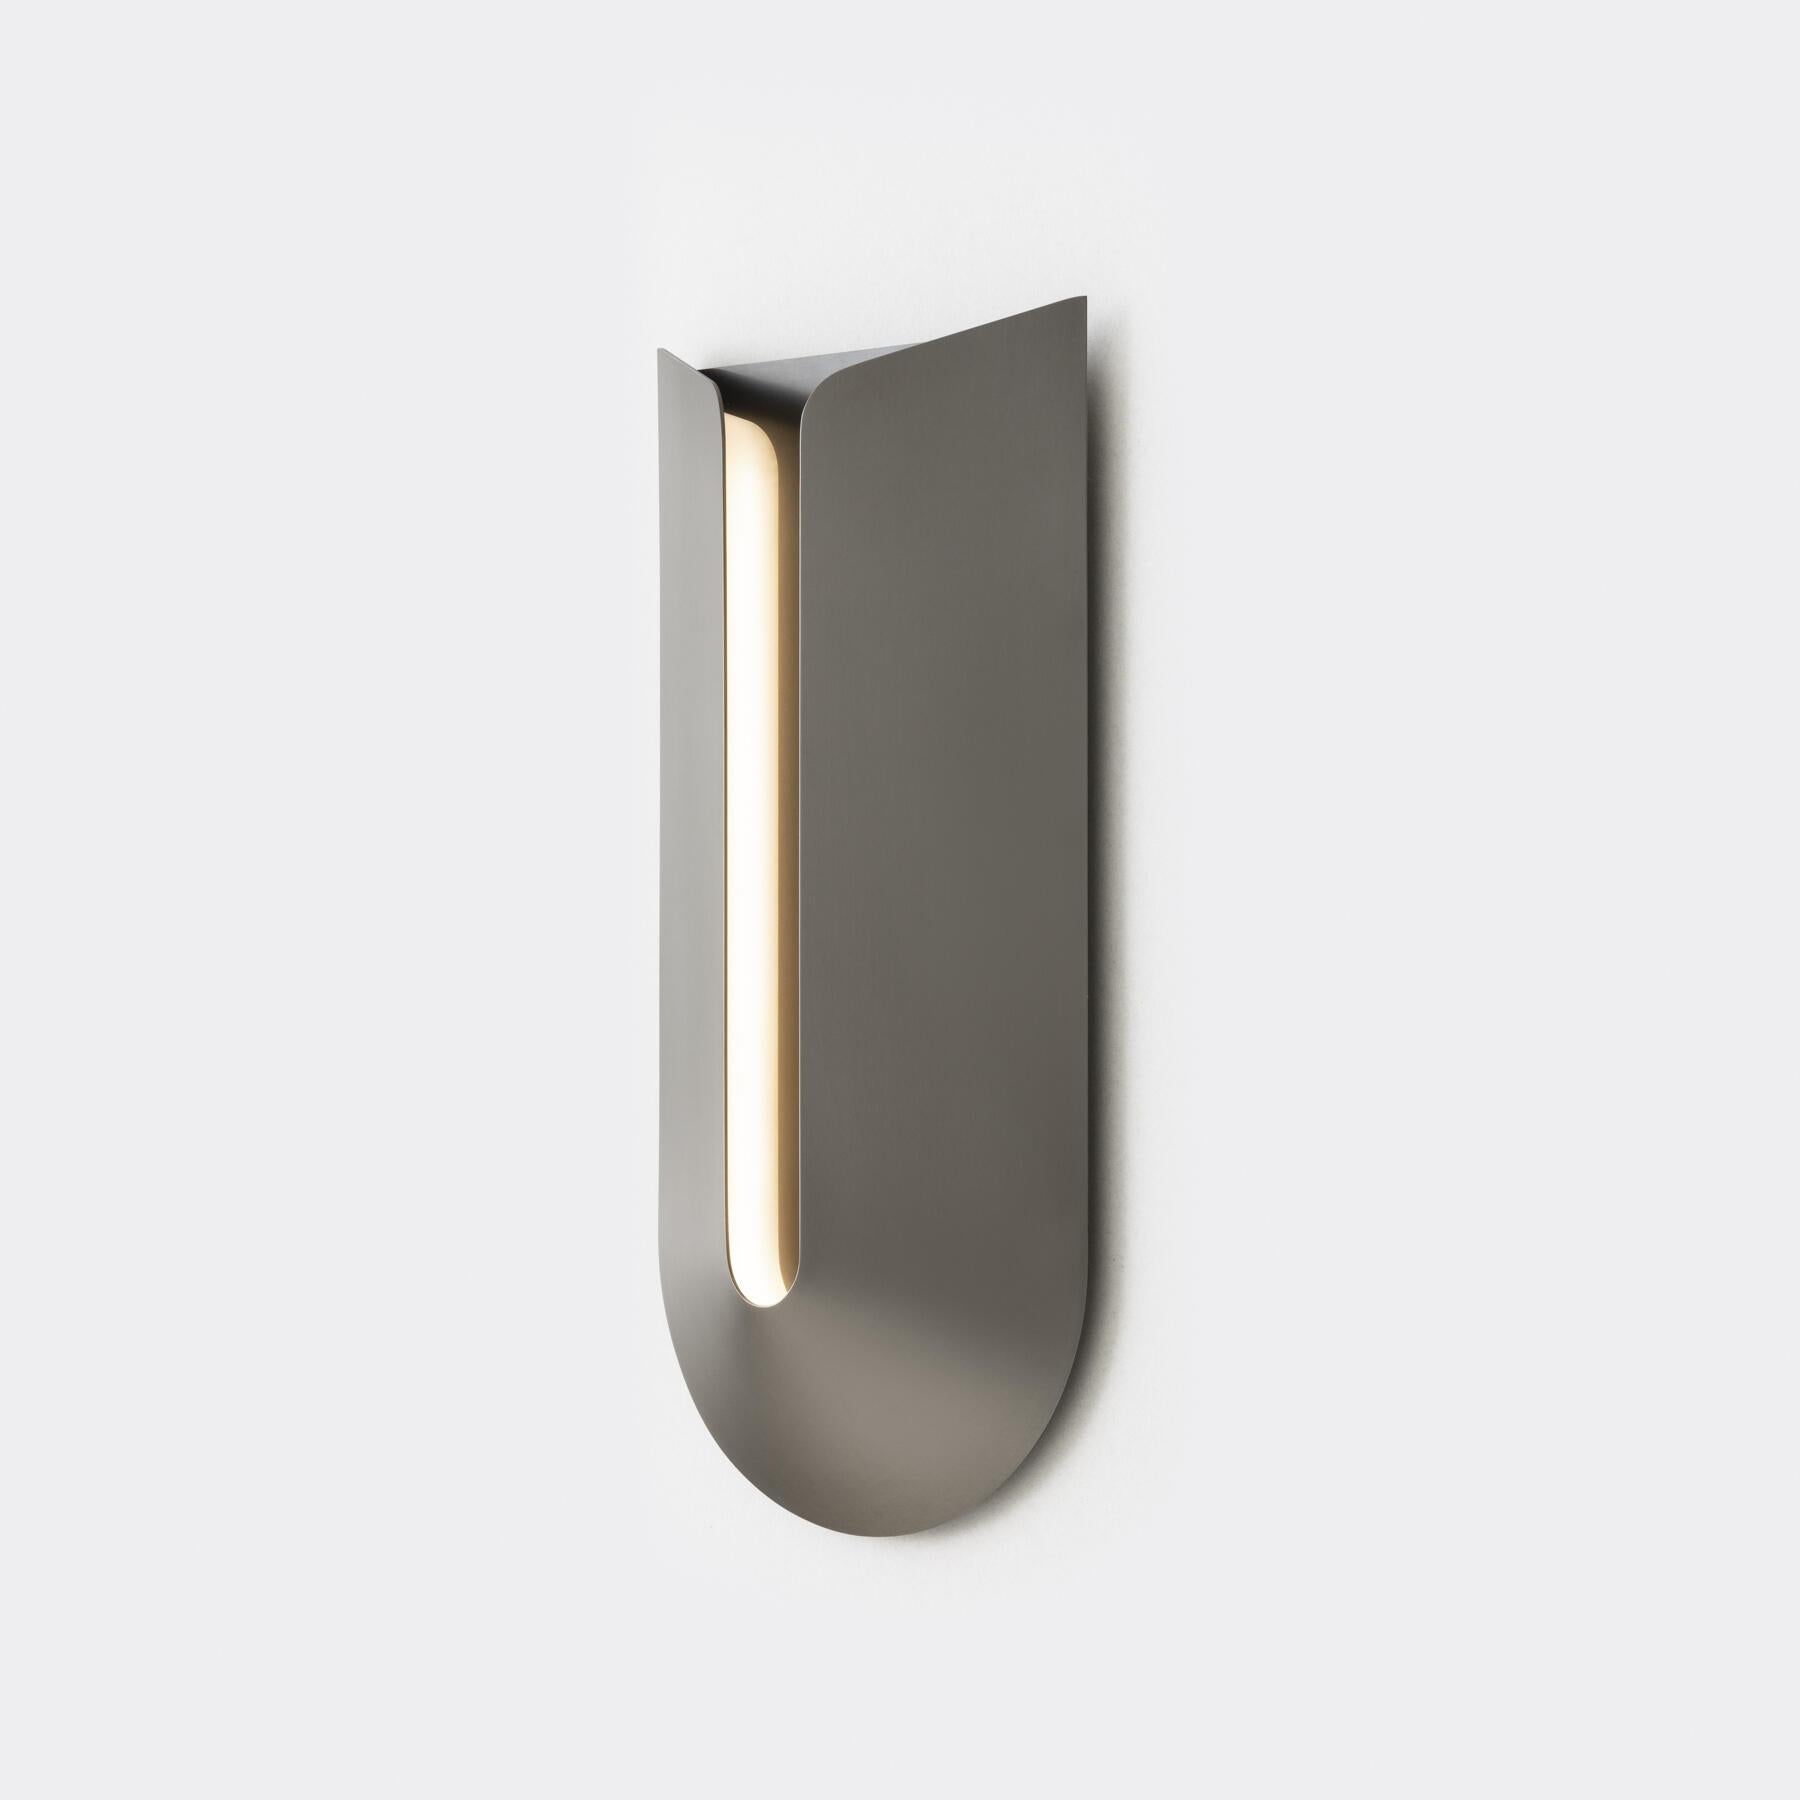 Cove is a low-profile but sizable sconce, with a minimal design that celebrates form and materiality in seemingly endless combinations. Whether mounted to wash light from above or below, the architectural curves of this ADA-compliant piece gently